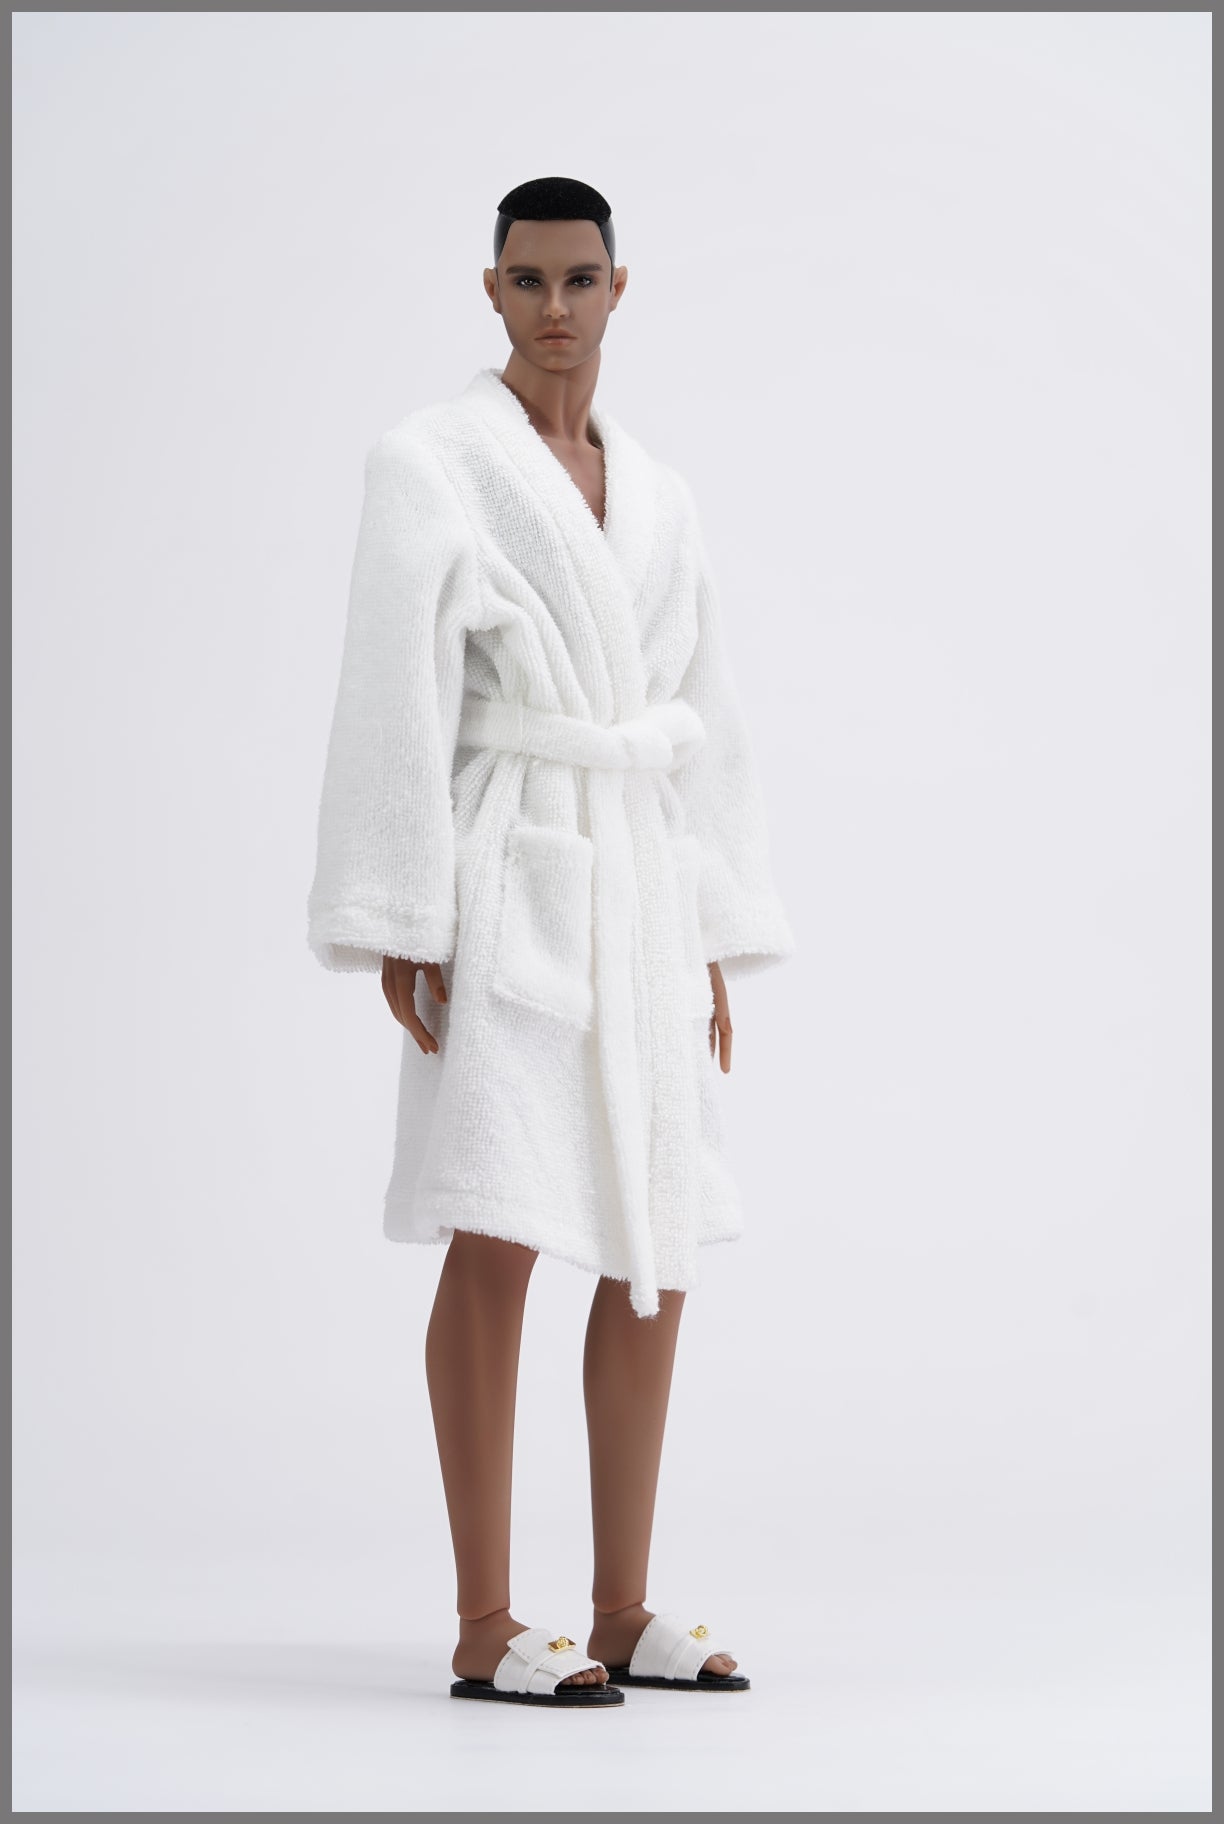 Muses La Vacanza Dusan Dressed Doll, Pre-Oder for Winter 2023 Delivery.